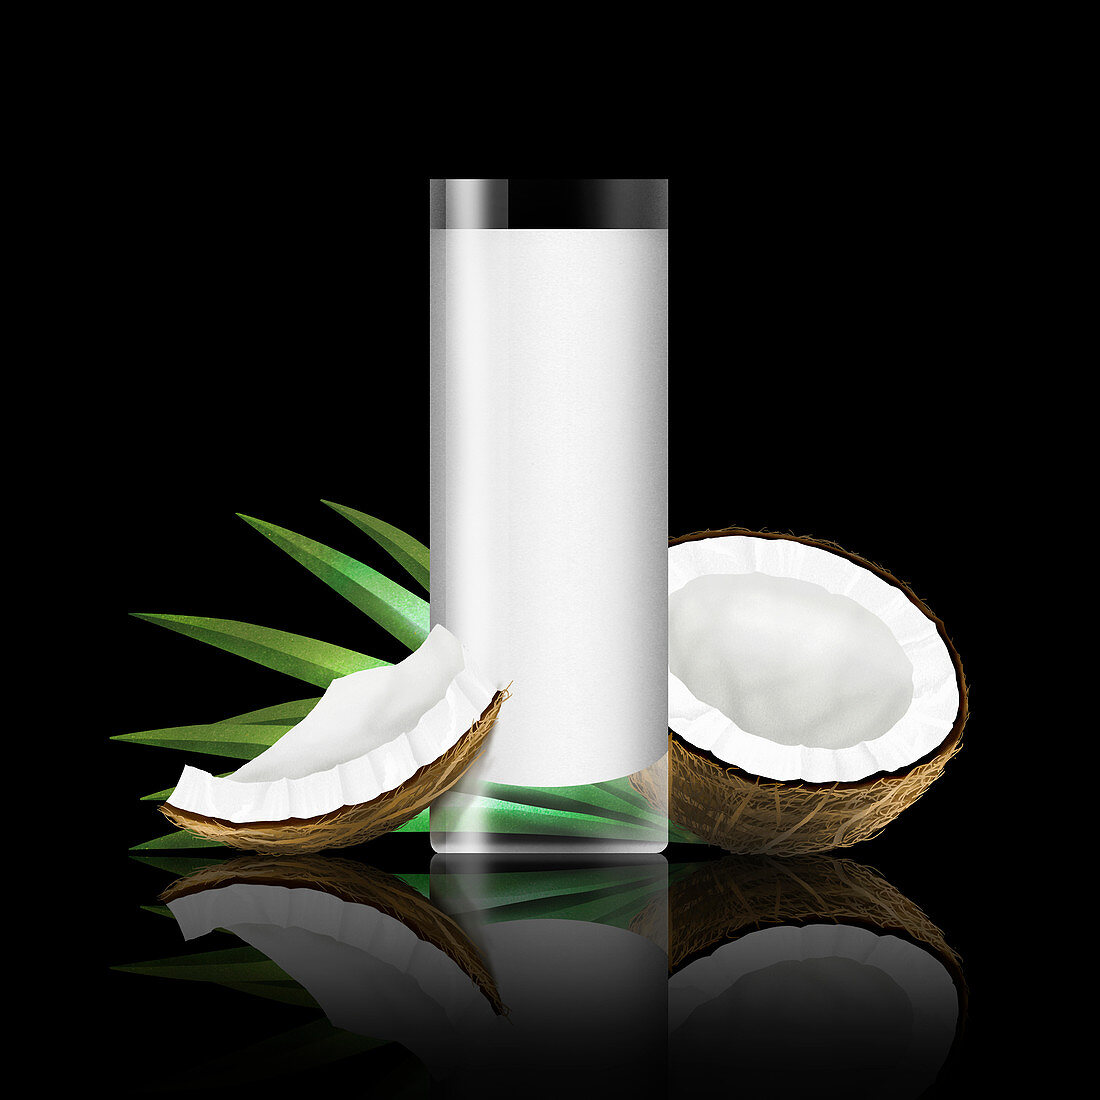 Glass of coconut milk with pieces of coconut, illustration